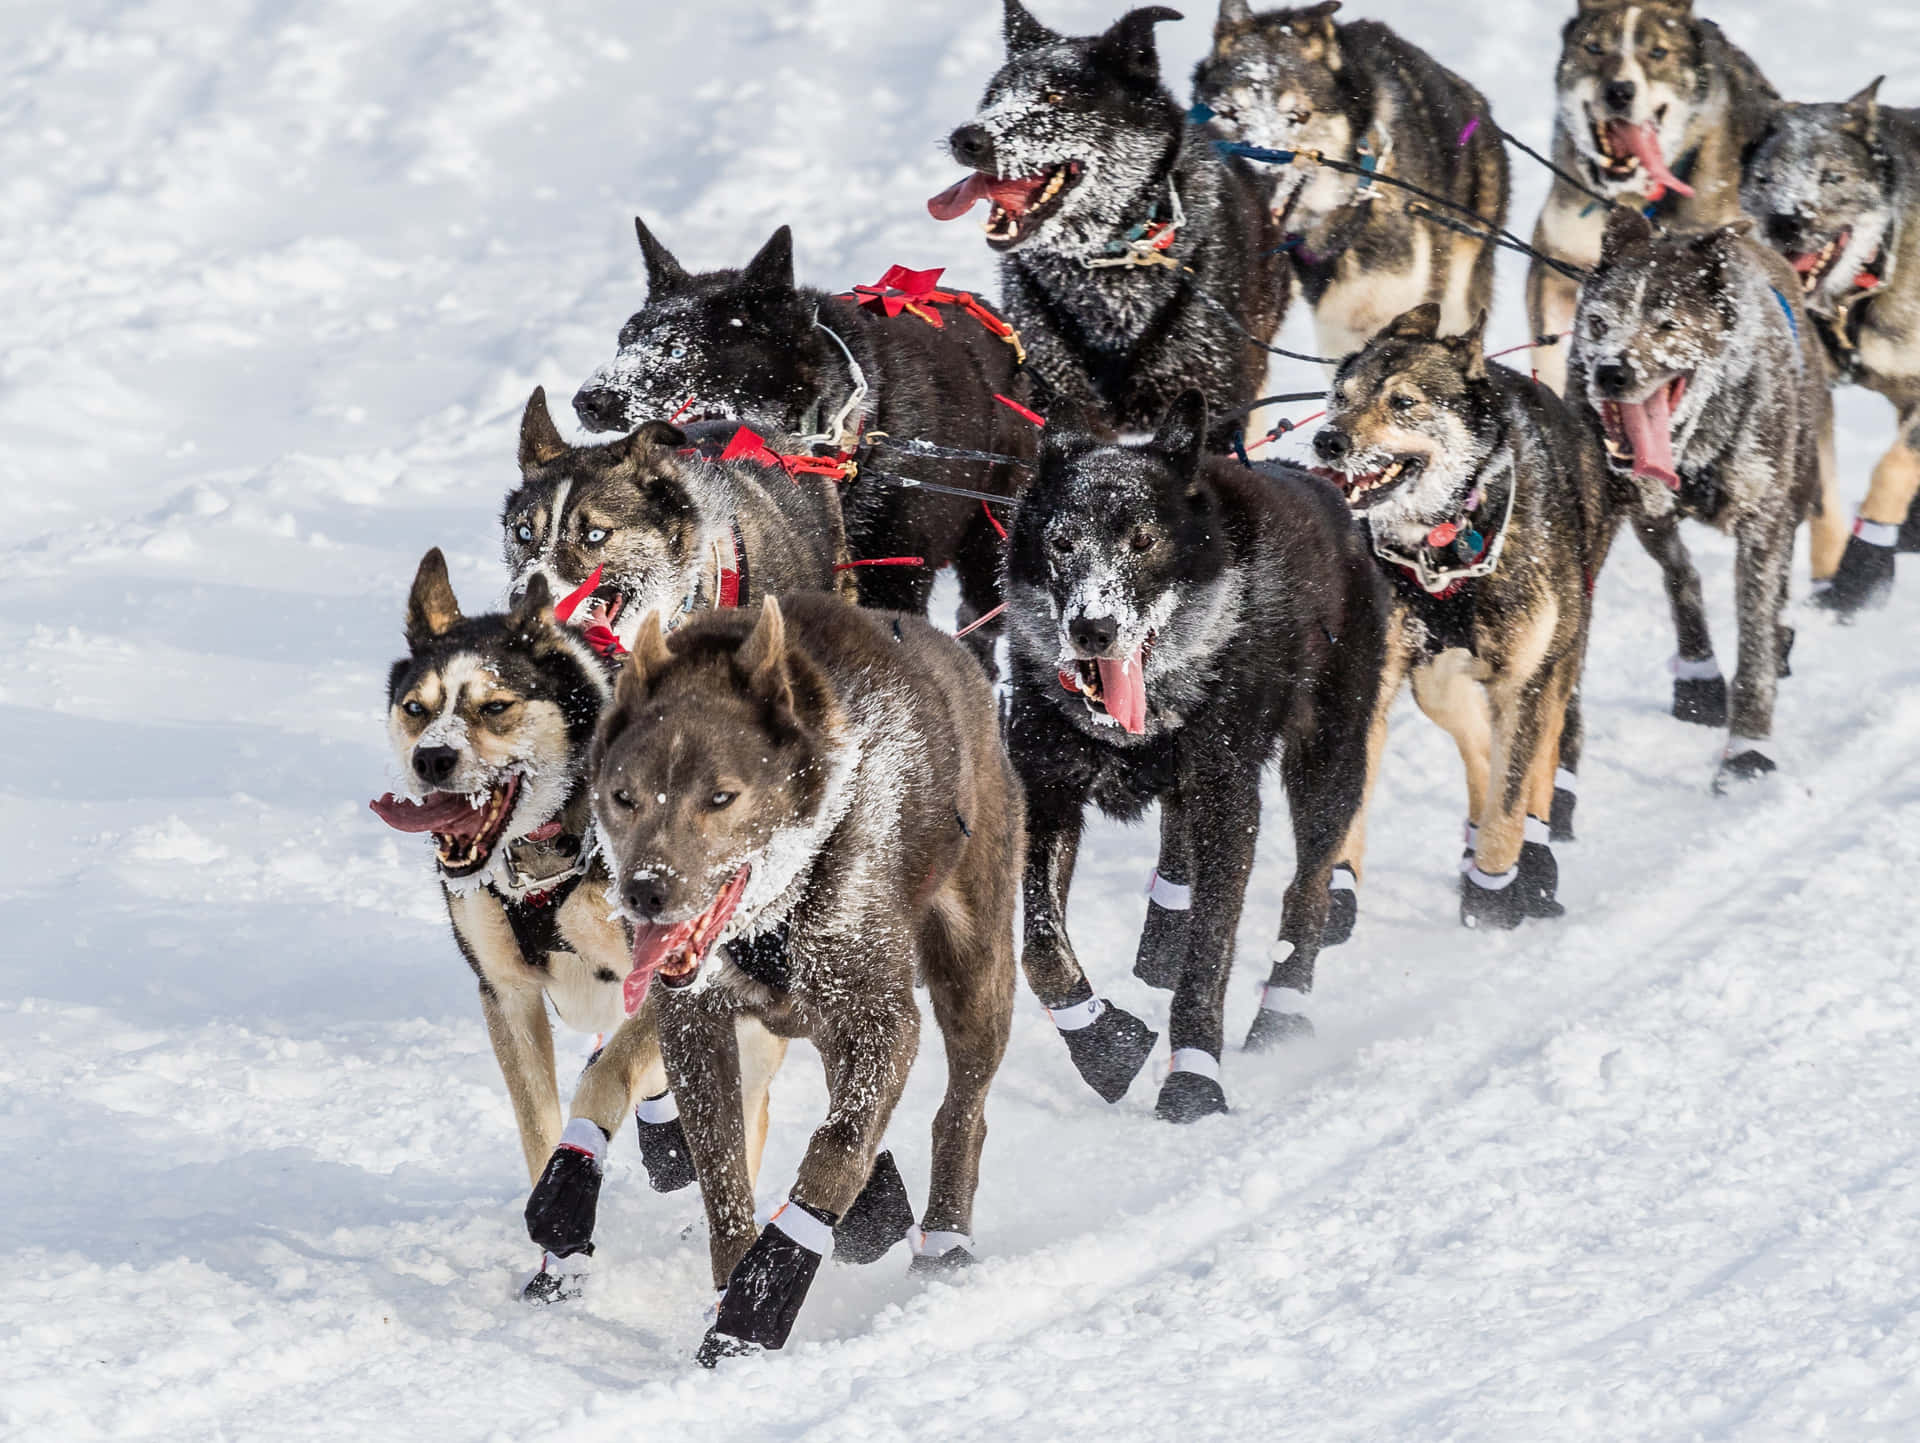 Caption: Strong Siberian Husky Sled Dogs In A Snowy Landscape Wallpaper